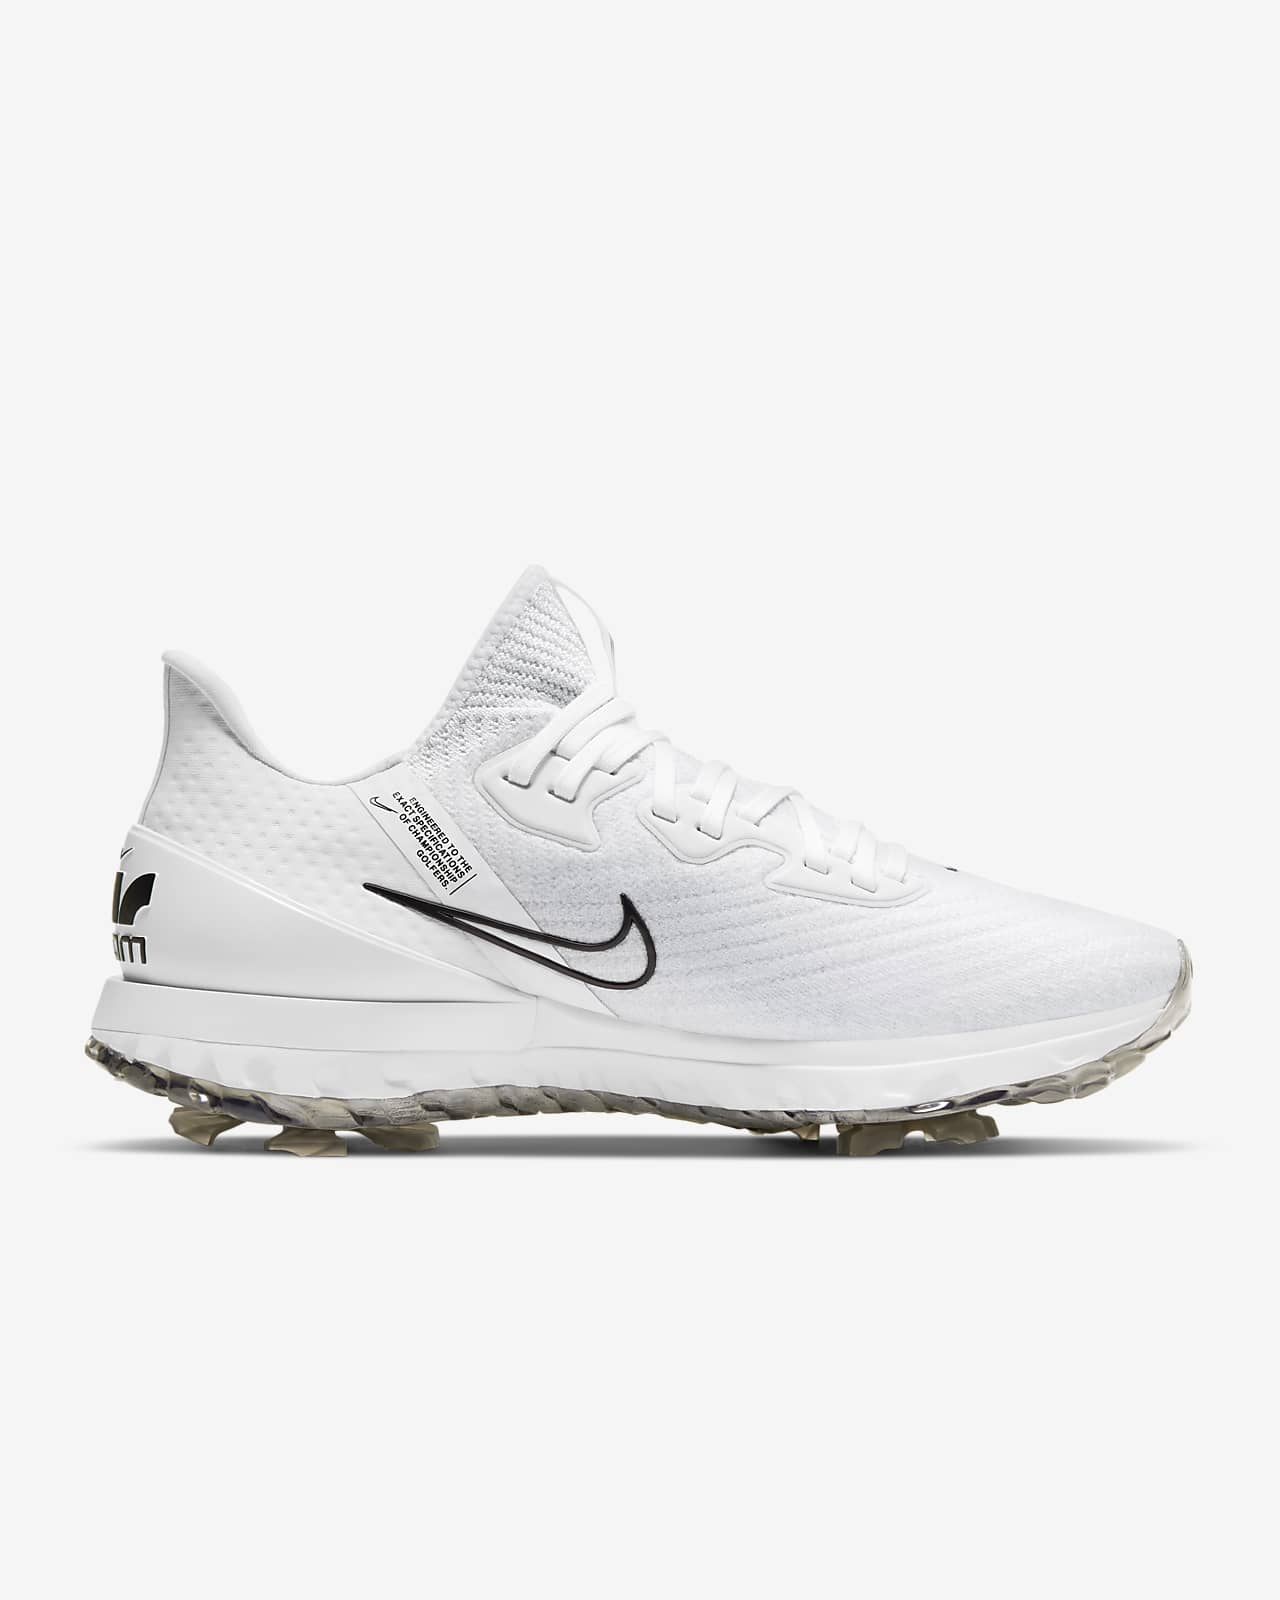 nike spiked golf shoes